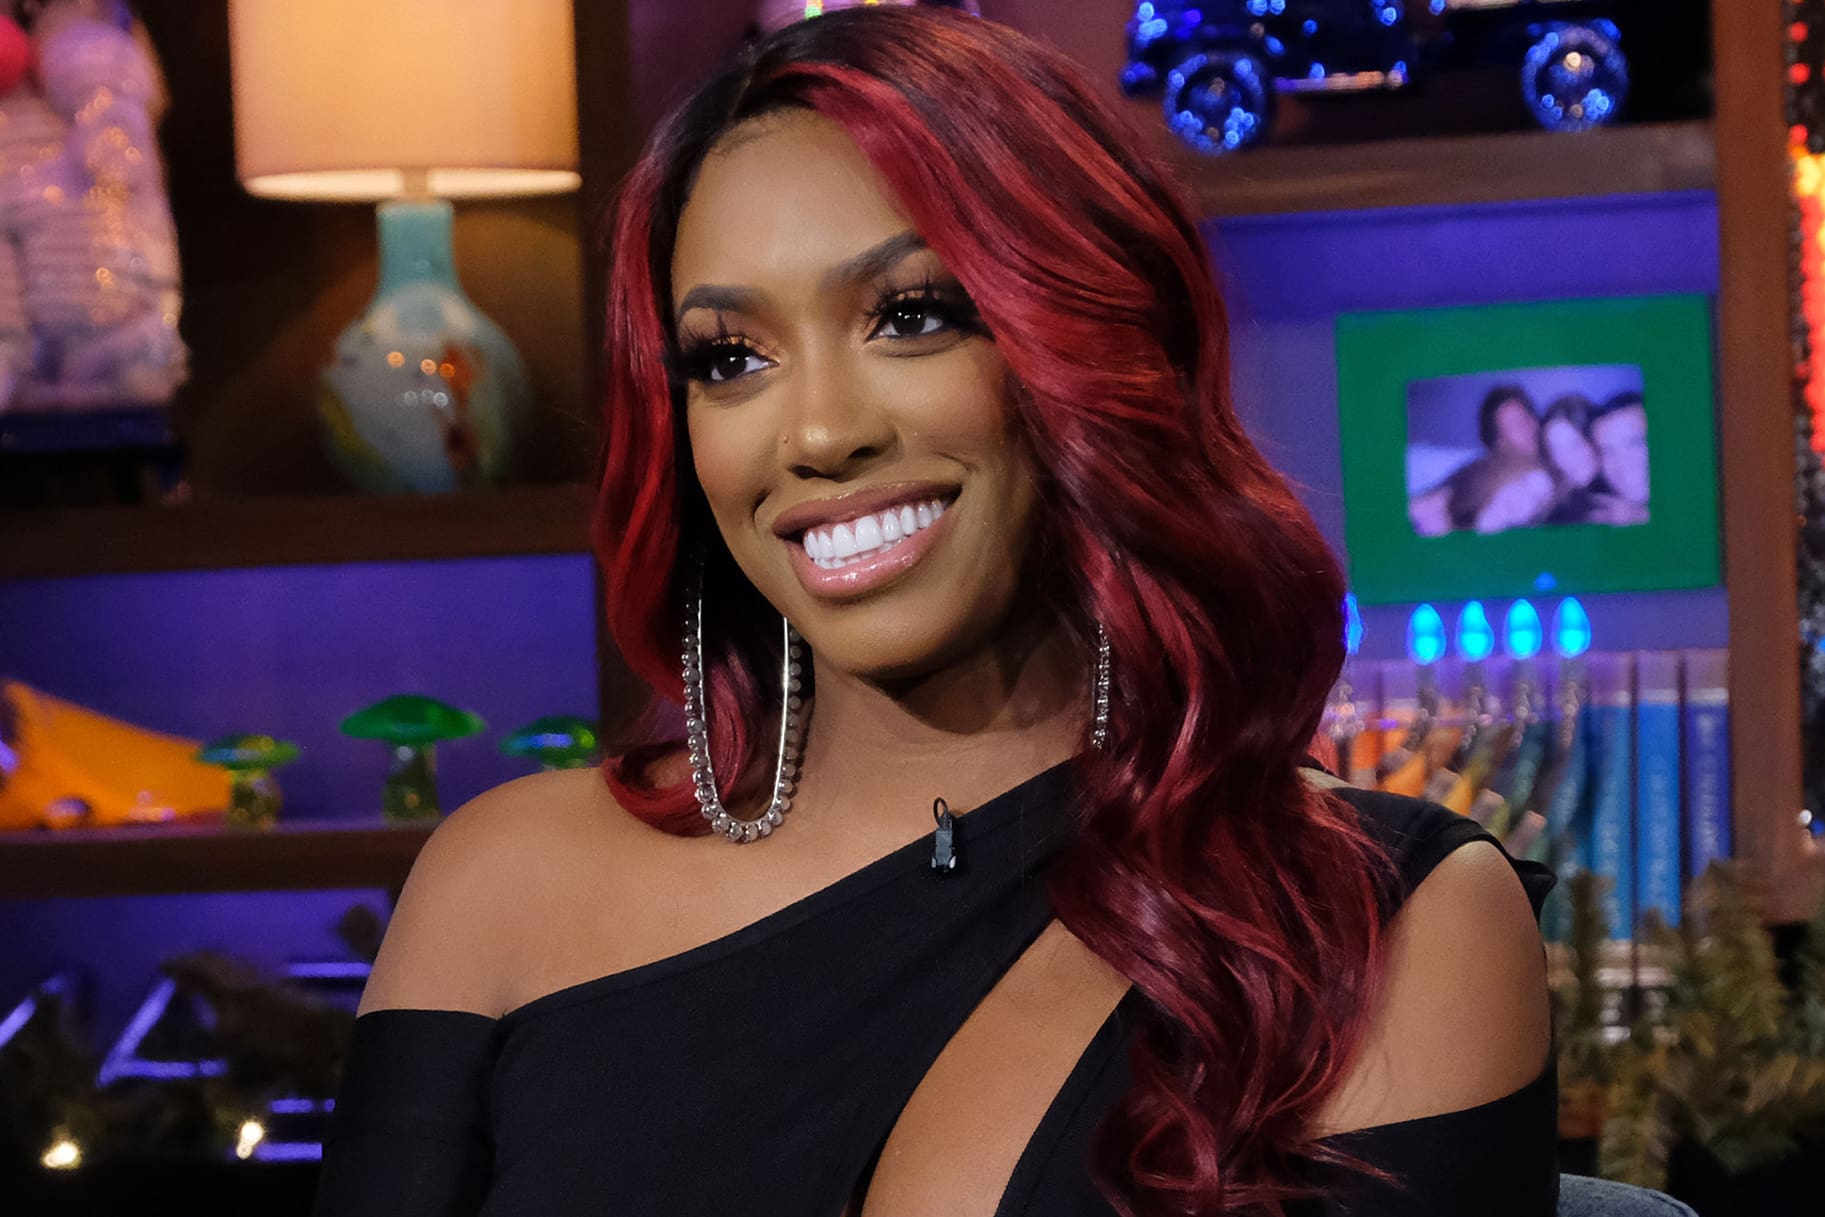 Porsha Williams Is Having The Time Of Her Life With Her Family - Check Out The Sweet Videos